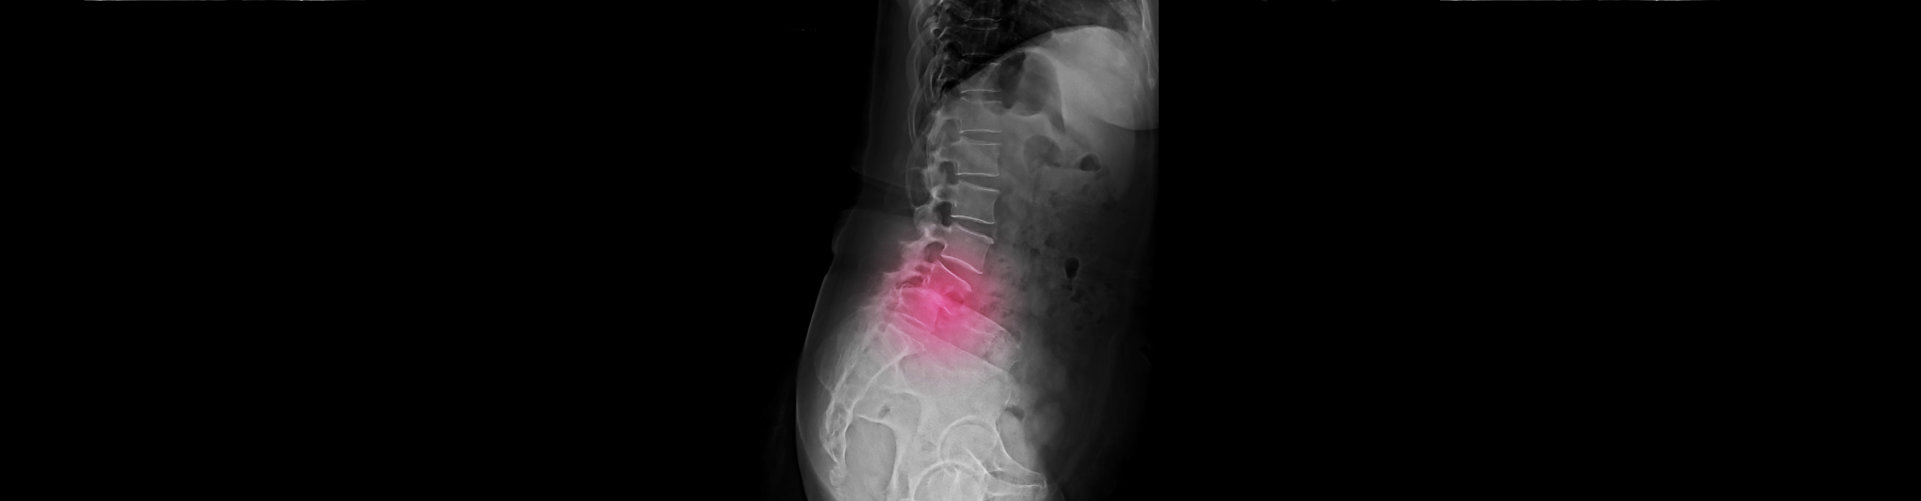 a lateral x-ray of lumbar spine showing degenerative spondylolisthesis of L4-5 that causes spinal canal stenosis and low back pain